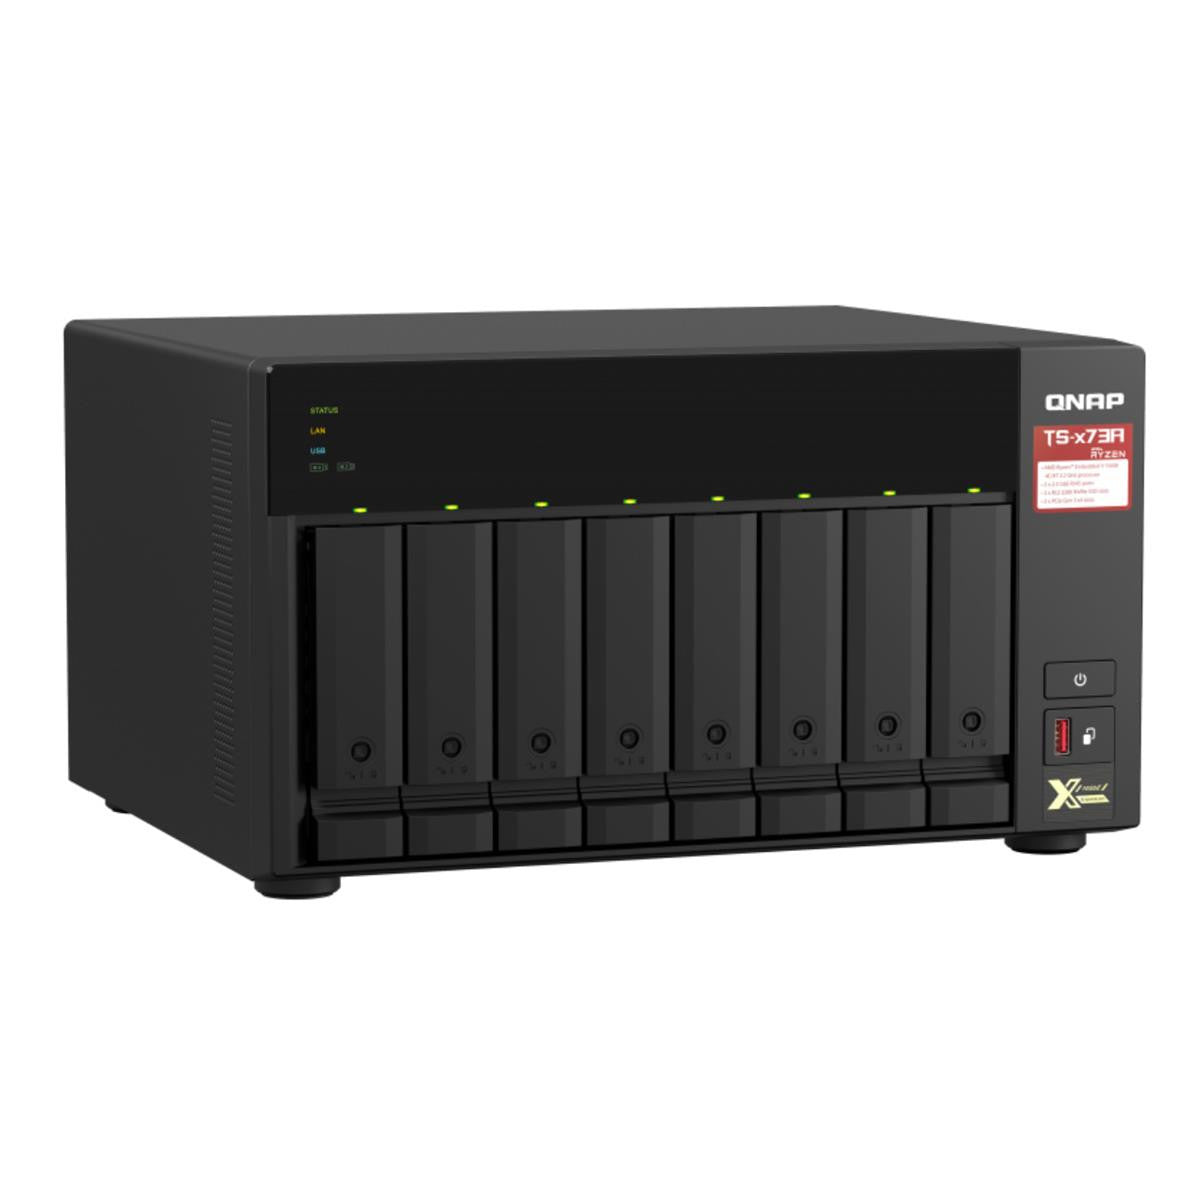 QNAP TS-873A 8-BAY NAS with 64GB DDR4 RAM and 32TB (8x4TB) Seagate Ironwolf NAS Drives Fully Assembled and Tested